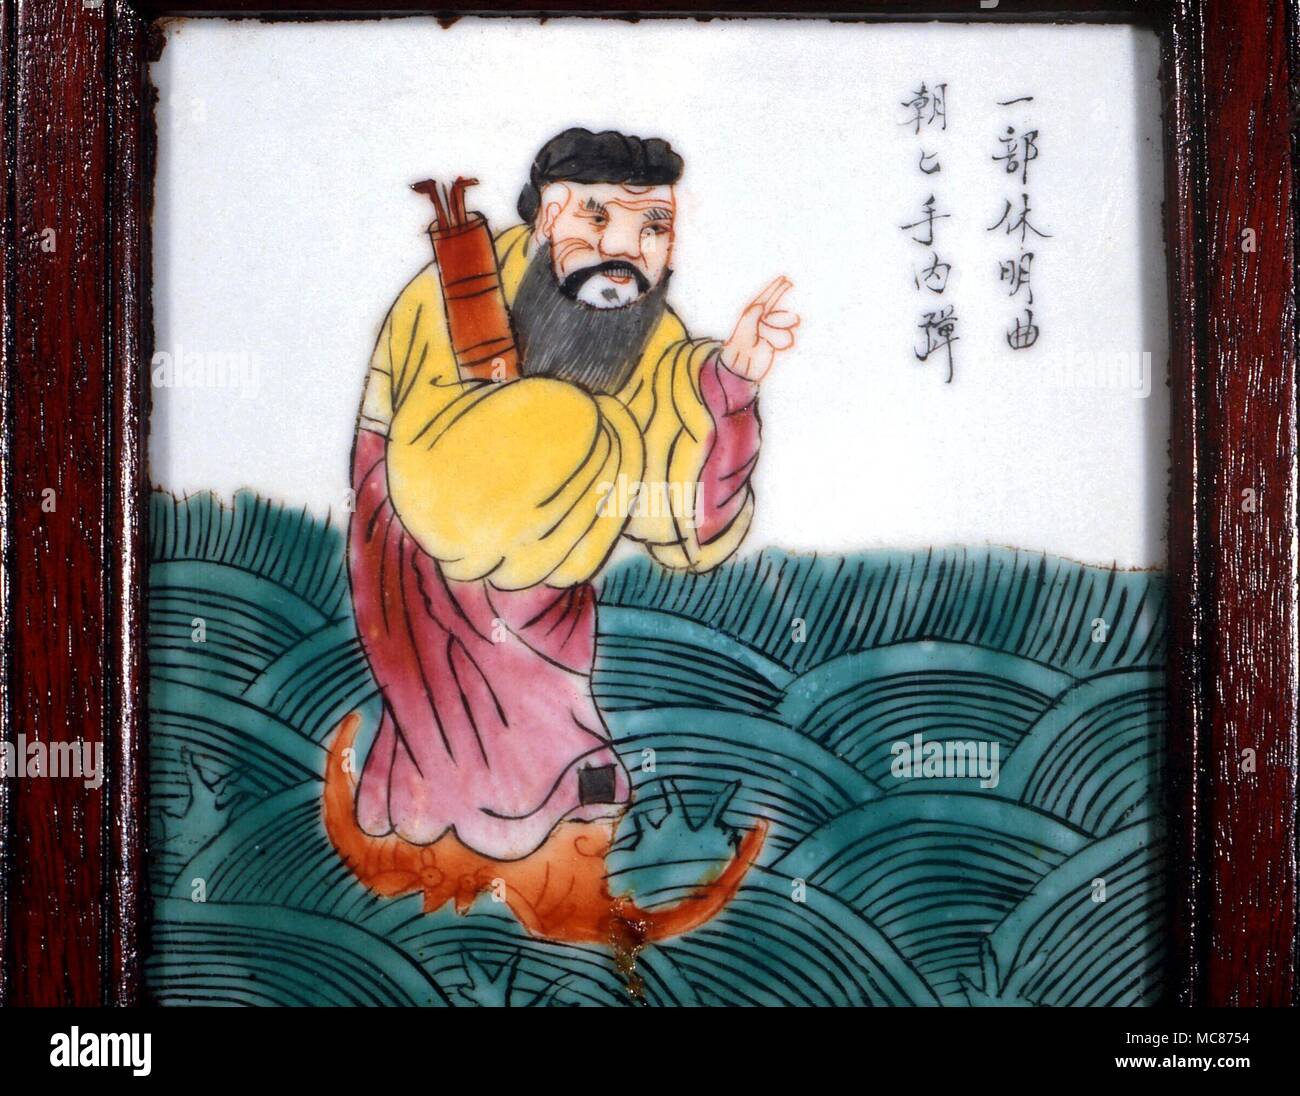 Taoism. Taoism - One of the Taoist 'Eight Immortals- (Pa Hsien). Chang Kuo-lao. he rides a mule which he can fold up in his wallet, and carries the Yo Ku, musical instrument. Knows the art of invisibility. Mid-19th century Chinese tile, from a screen Stock Photo